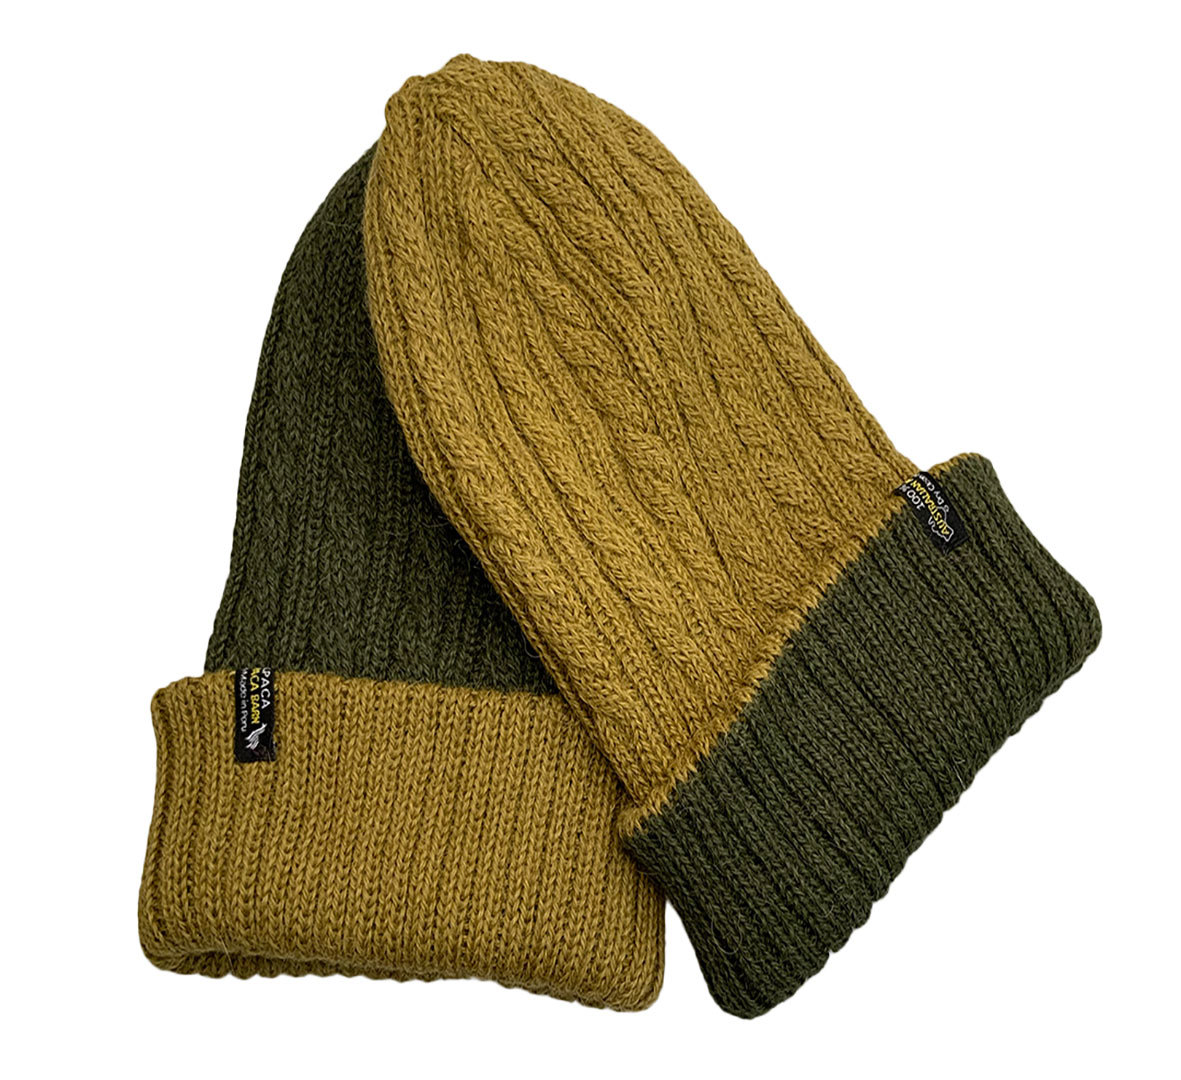 Reversible Hand Knit Alpaca Beanie - Military Green/Withered Green - 3